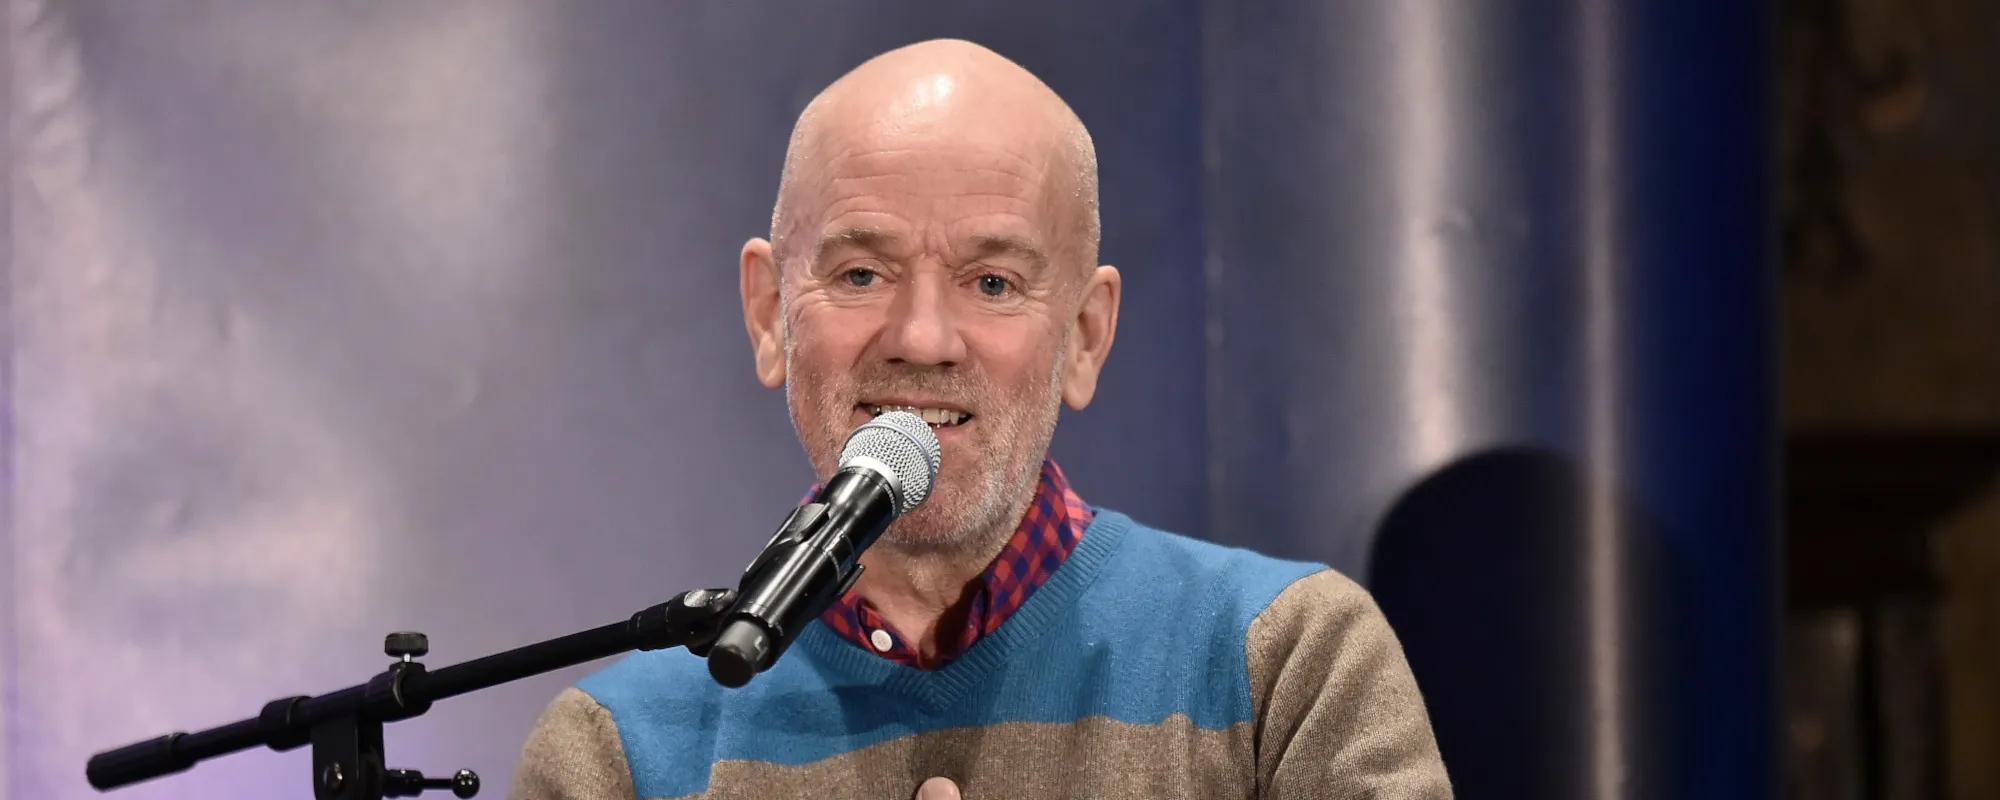 Michael Stipe Set to Release First Solo Album in 2023